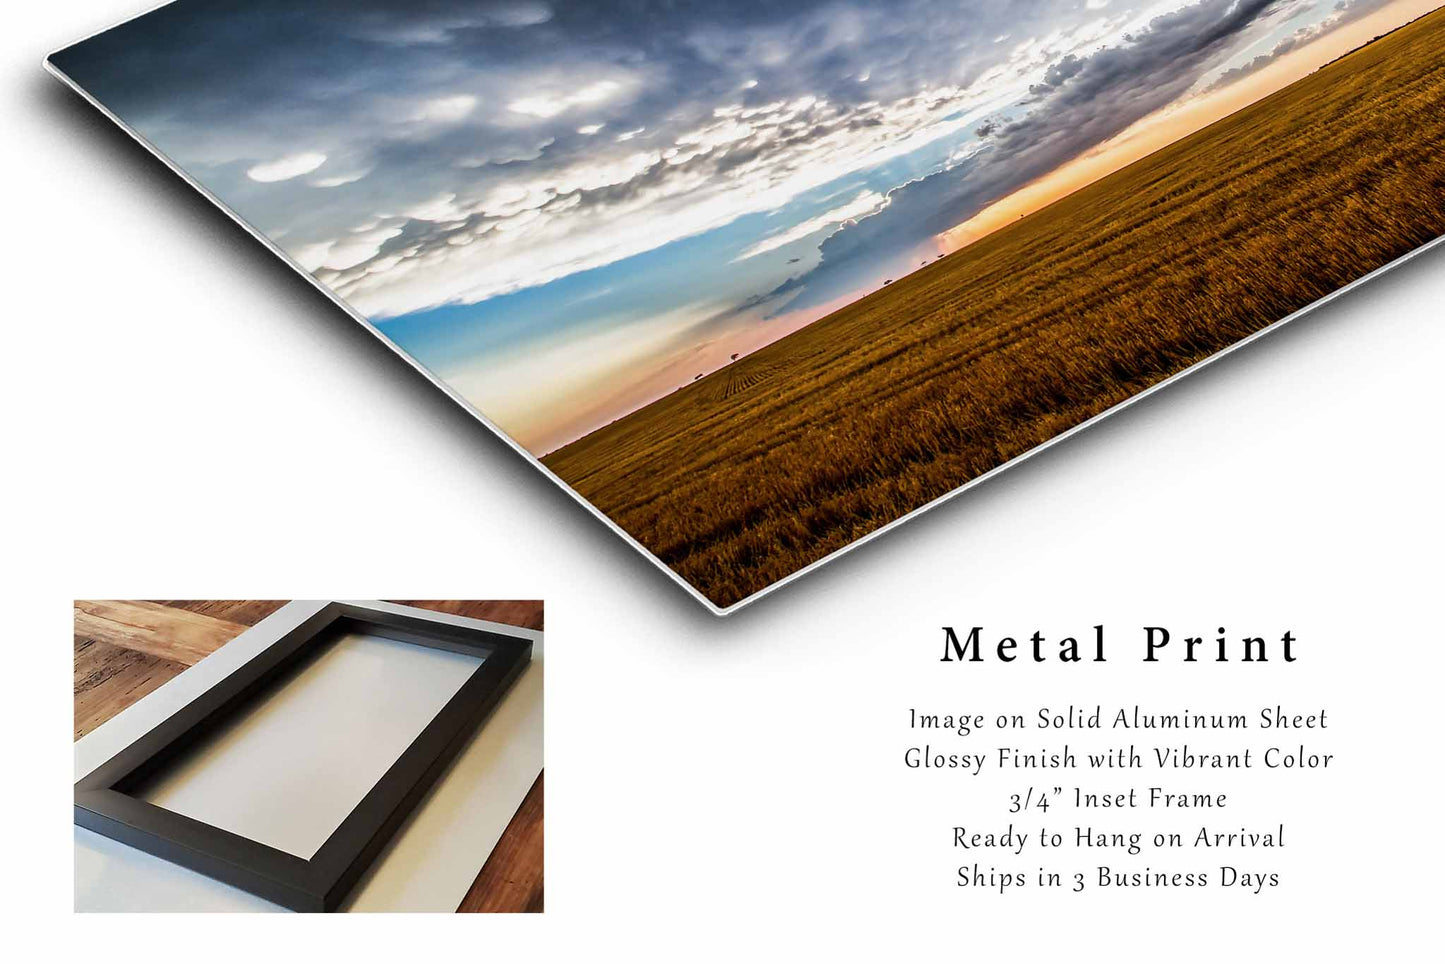 Great Plains Metal Print (Ready to Hang) Photo of Clouds Over Field at Sunset After Stormy Evening in Texas Sky Wall Art Western Decor